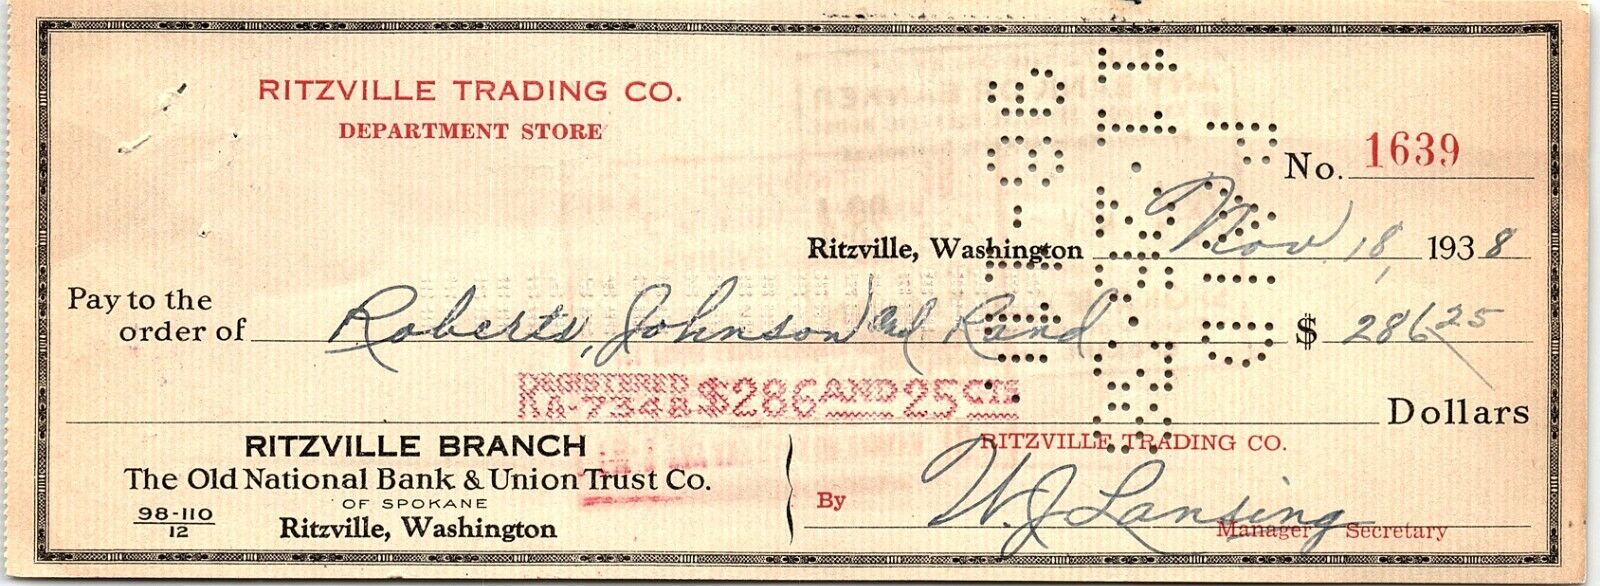 1938 RITZVILLE TRADING CO DEPARTMENT STORE WASHINGTON STATE BANK CHECK Z1594